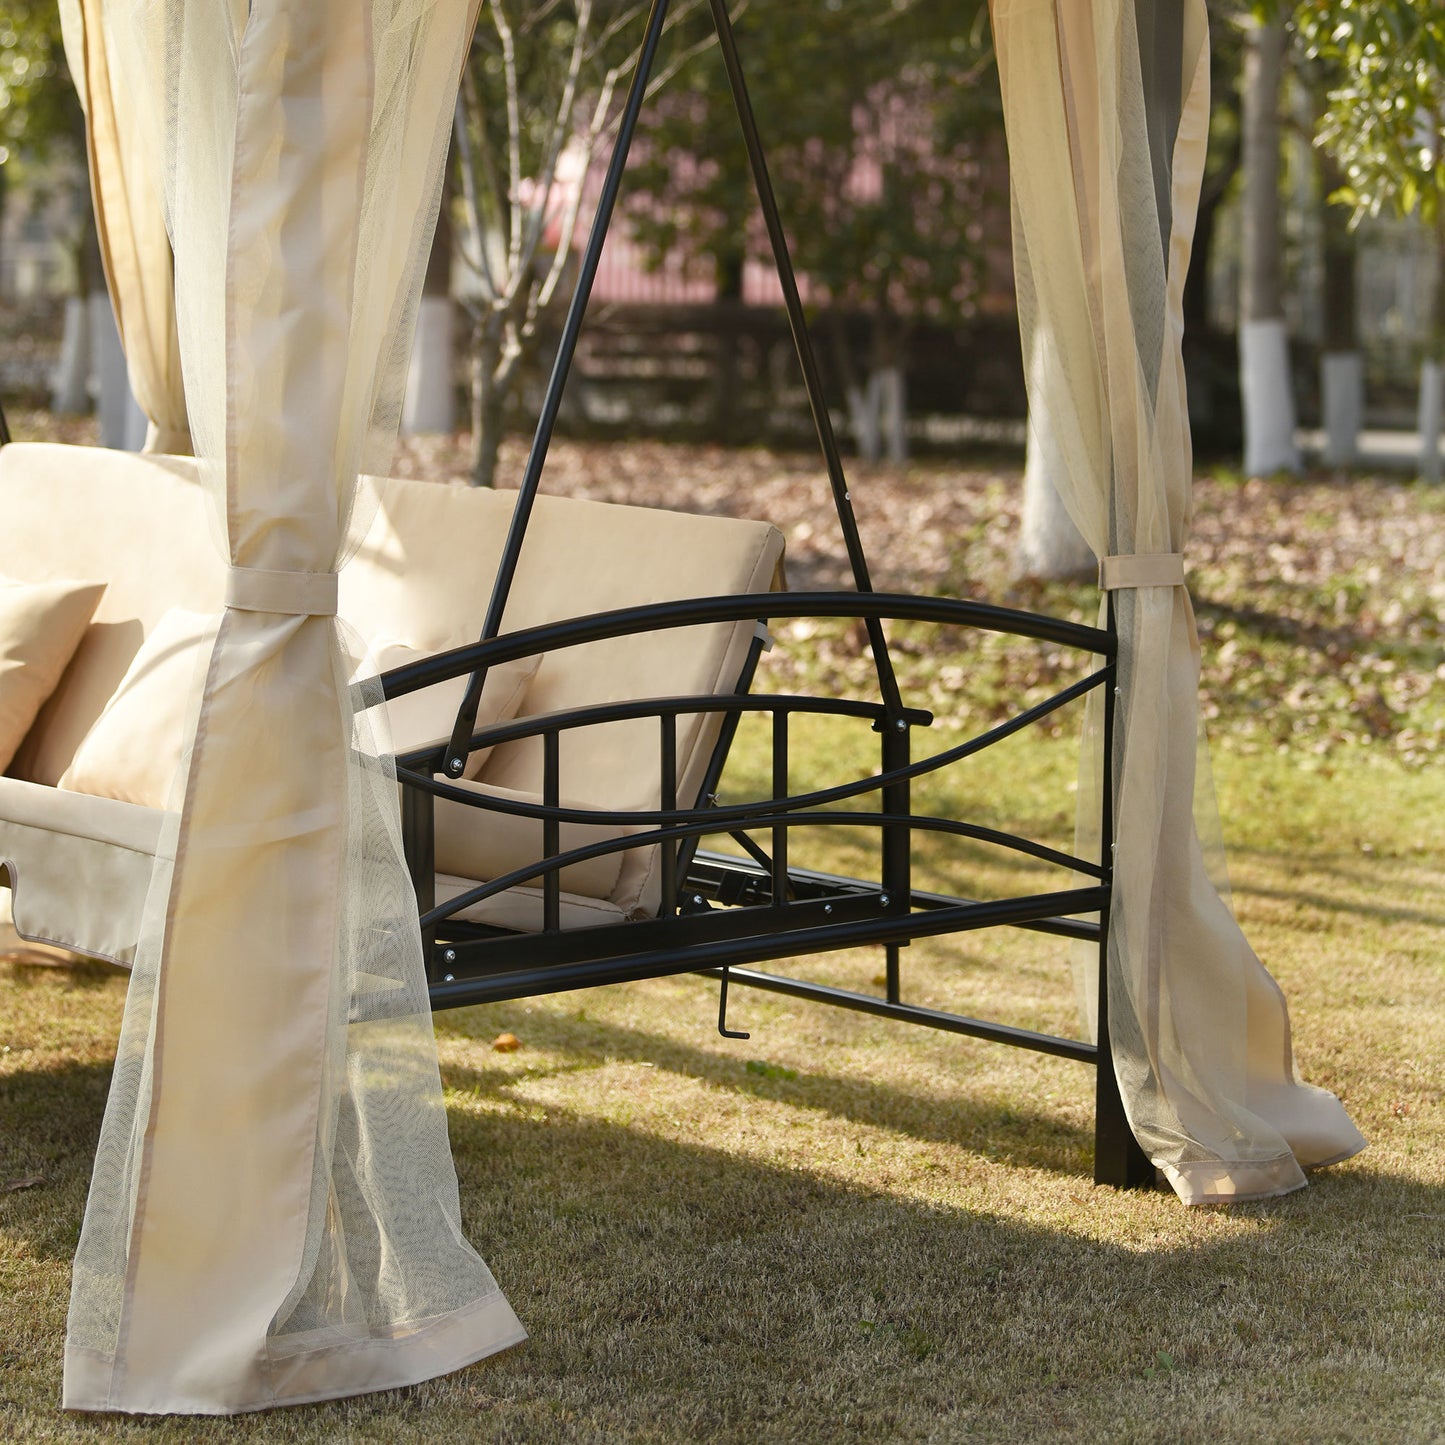 Outdoor Gazebo with Convertible Swing Bench and Mosquito Netting